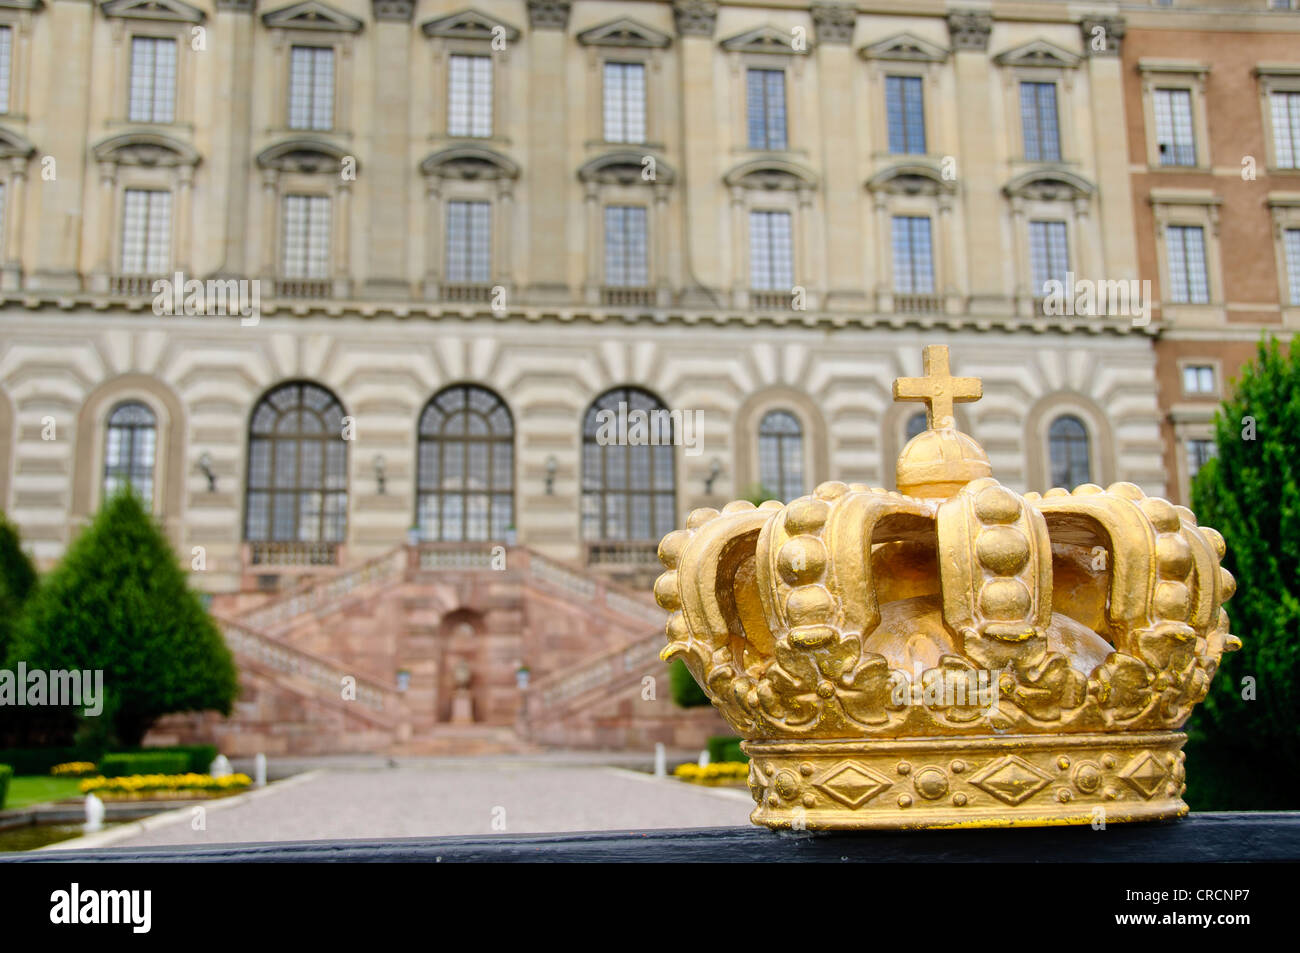 The facade of Stockholm Royal Palace (Kungliga slottet) in old town (Gamla stan), Stockholm, Sweden Stock Photo